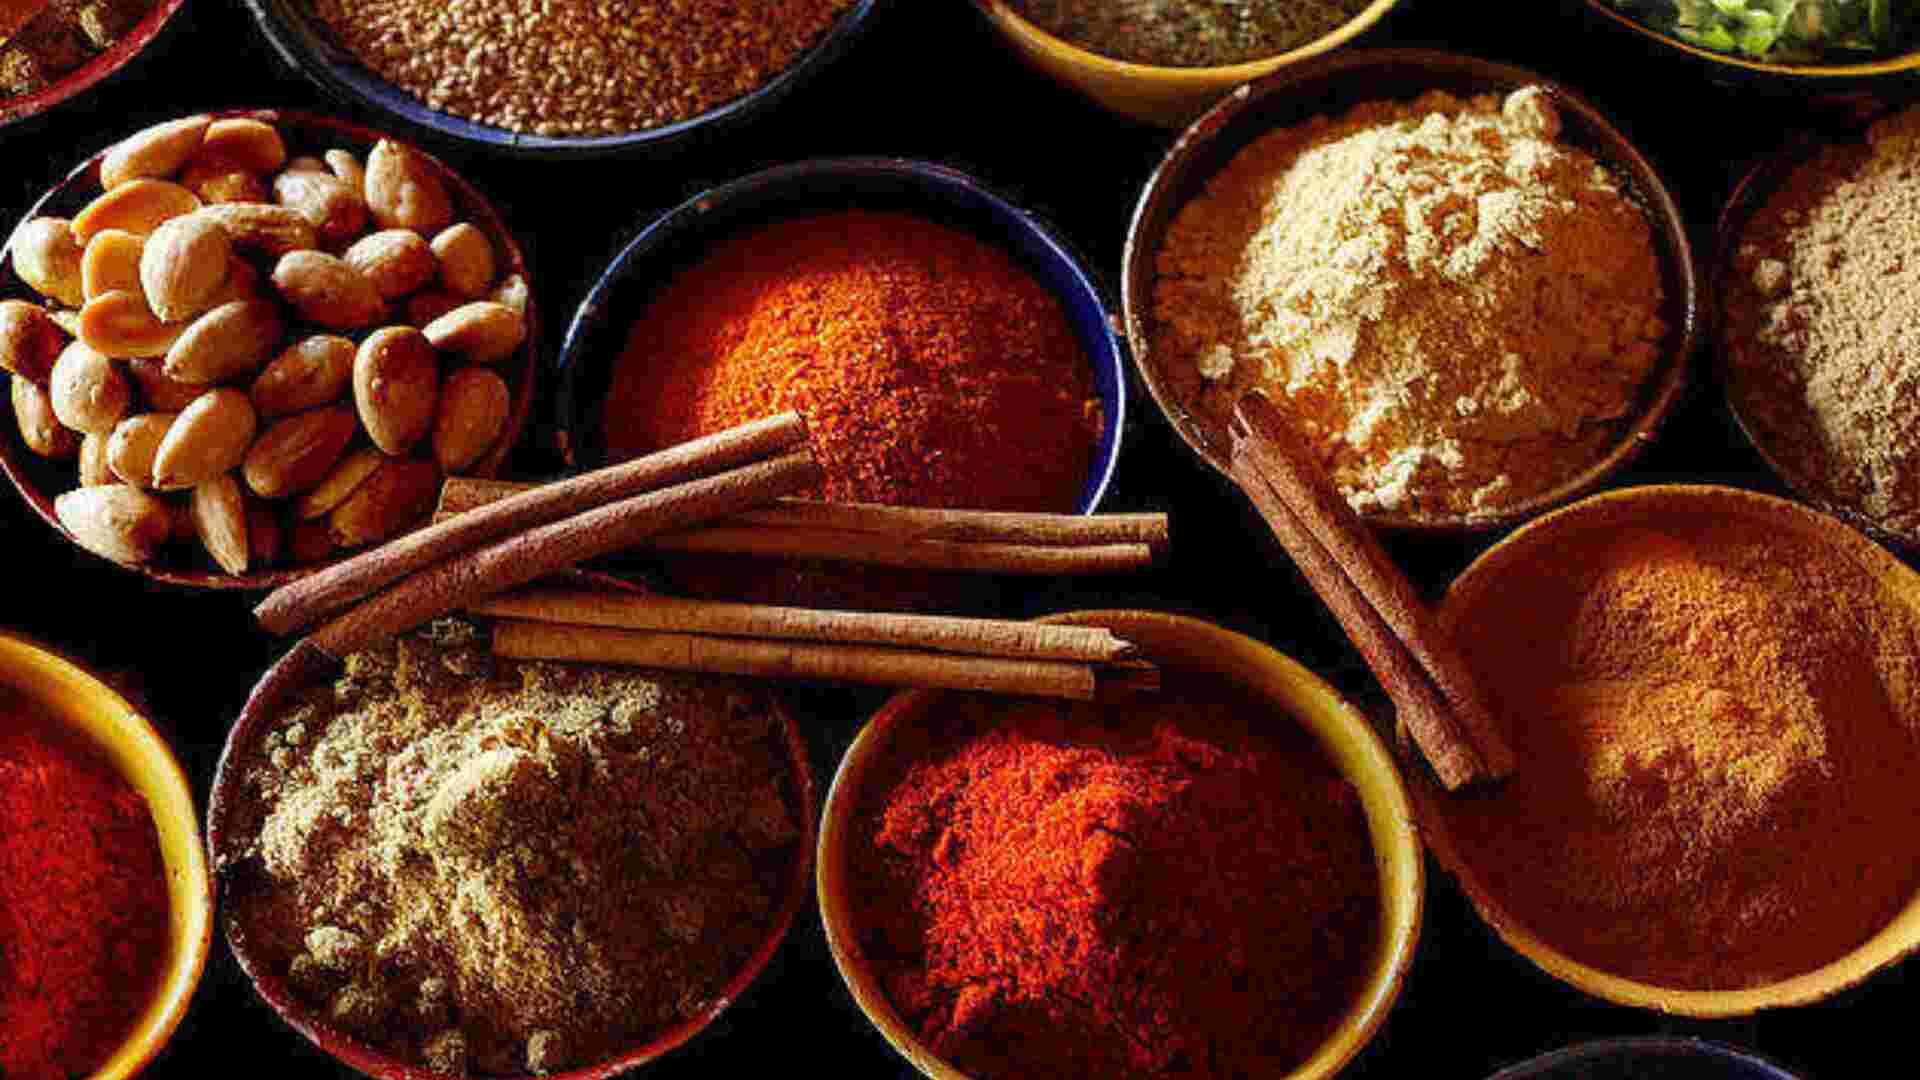 MDH: “Our Spices are Safe and Authentic”, Rejects Allegations